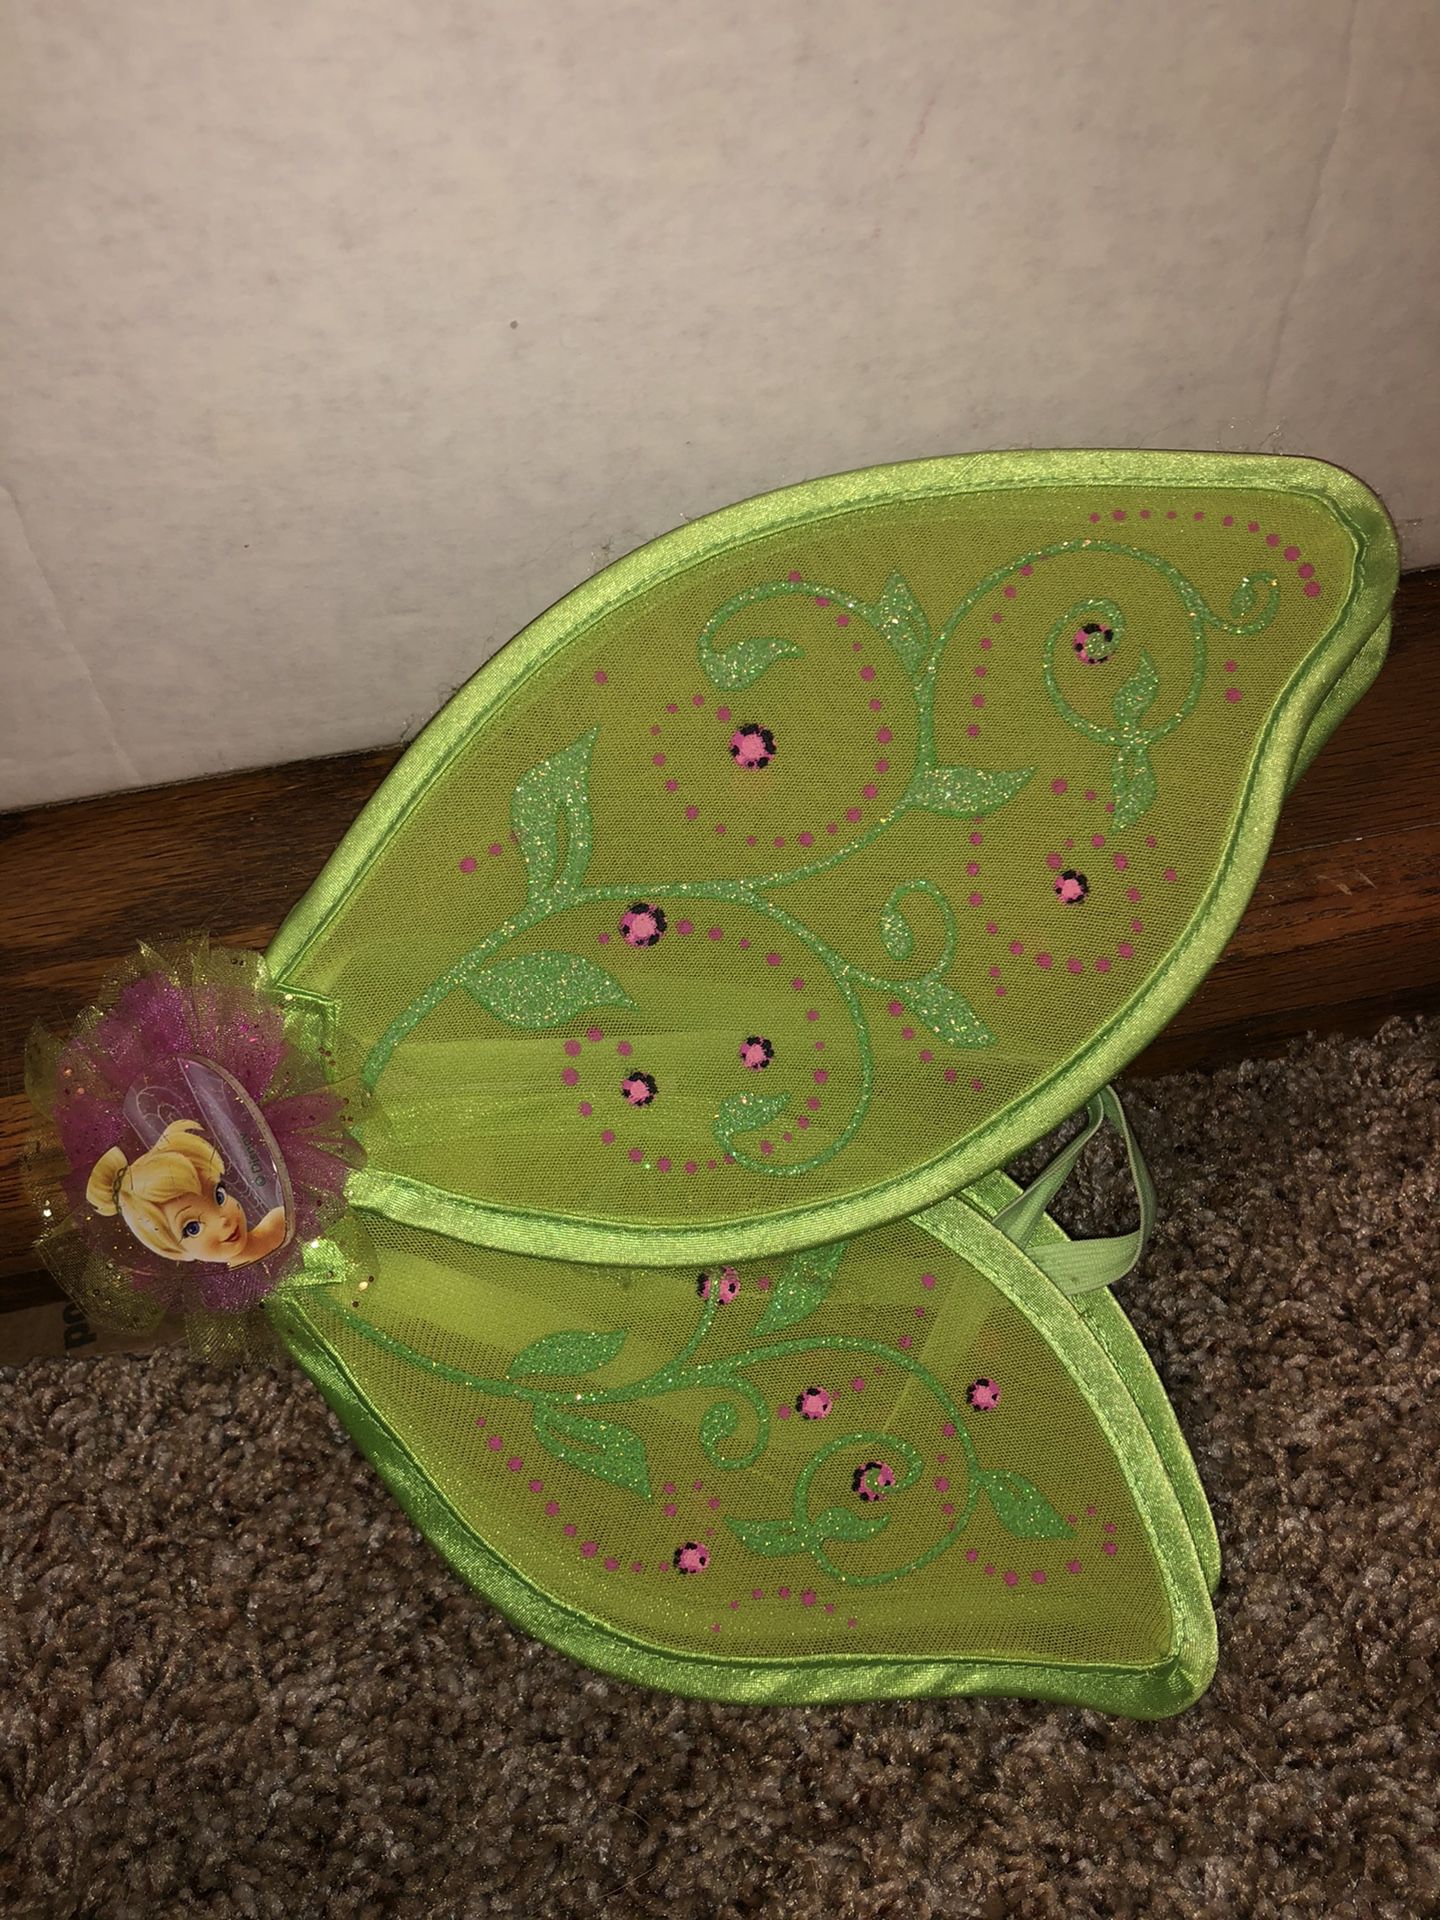 Disney fairies 🧚🏻‍♂️ Tinkerbell dress up wings for costume and play !